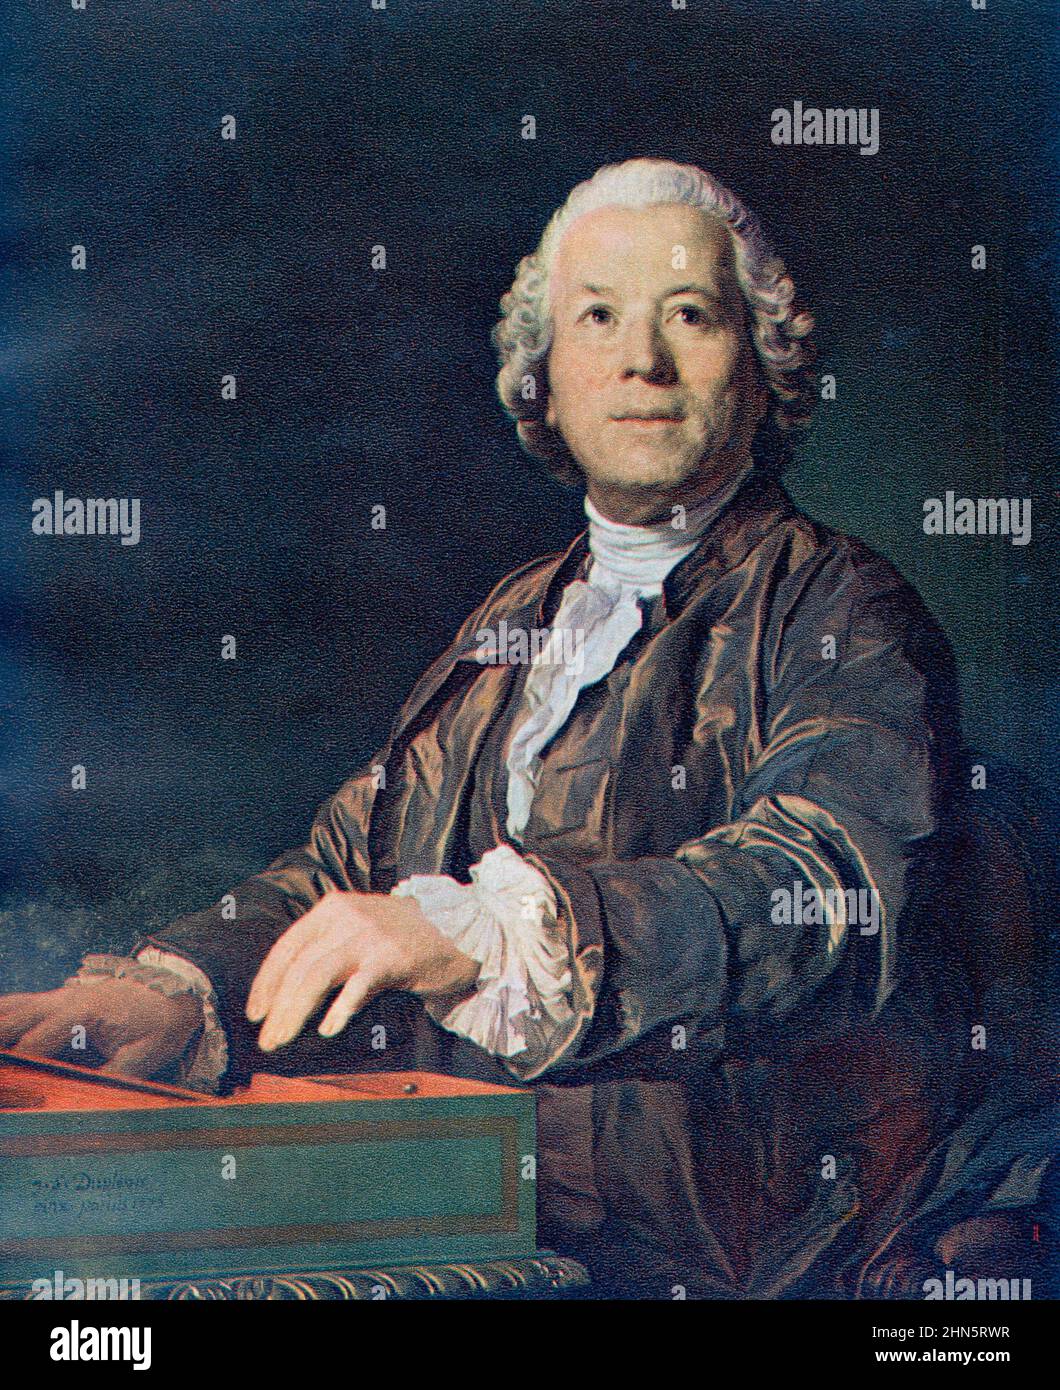 Christoph Willibald (Ritter von) Gluck , 1714 – 1787.  Composer of Italian and French opera in the early classical period.  From The Golden Age of Vienna, published 1948. Stock Photo